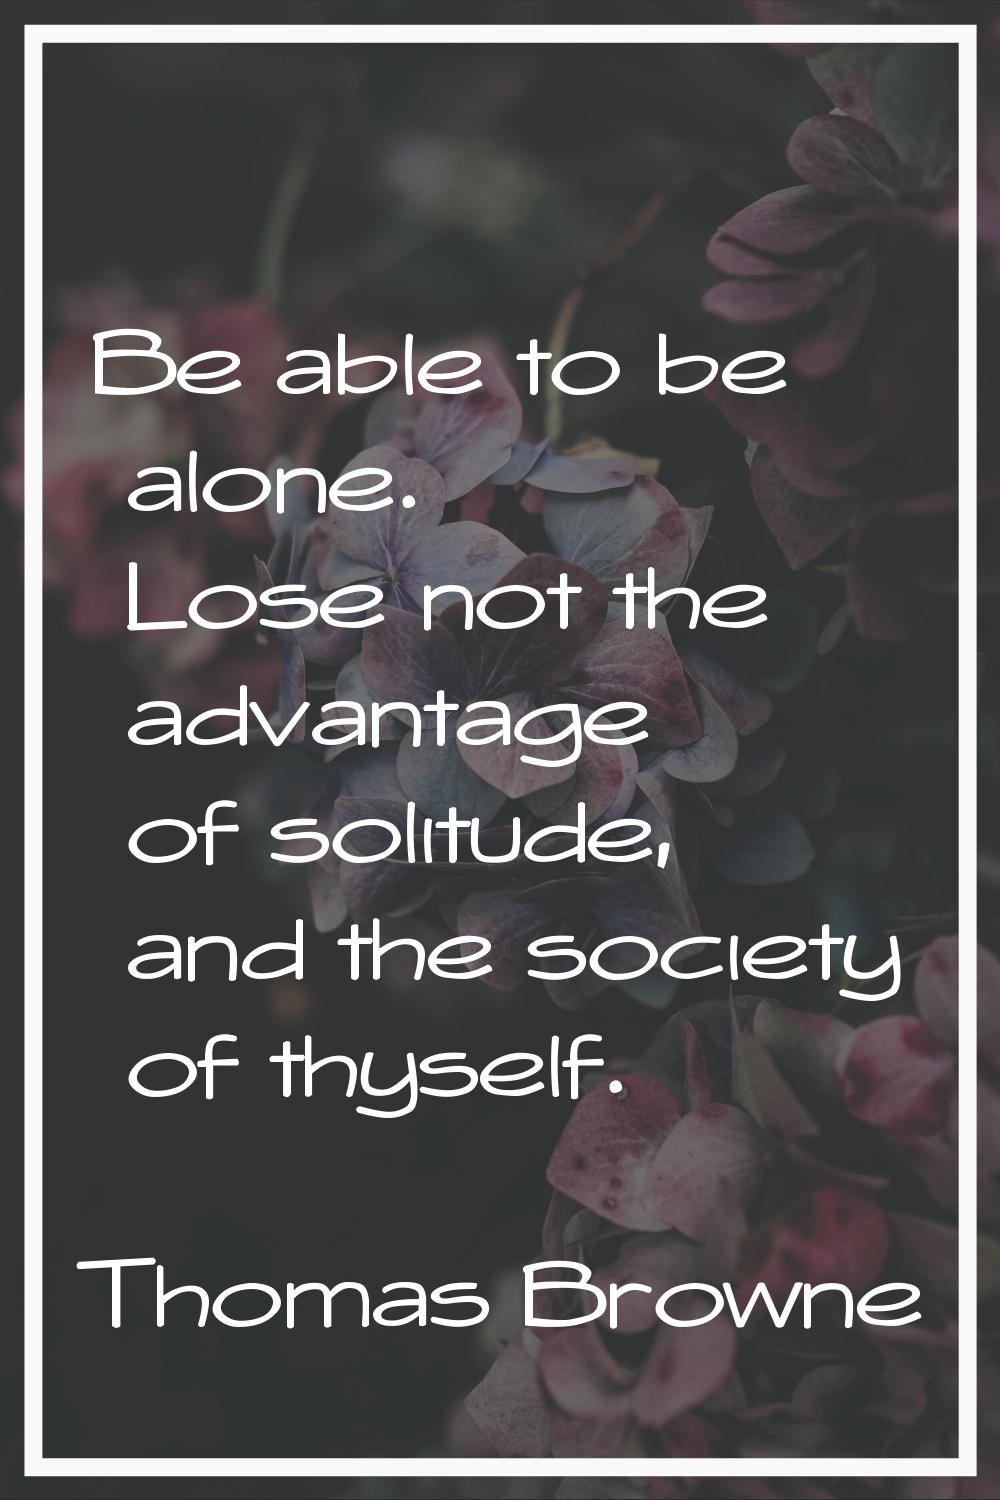 Be able to be alone. Lose not the advantage of solitude, and the society of thyself.